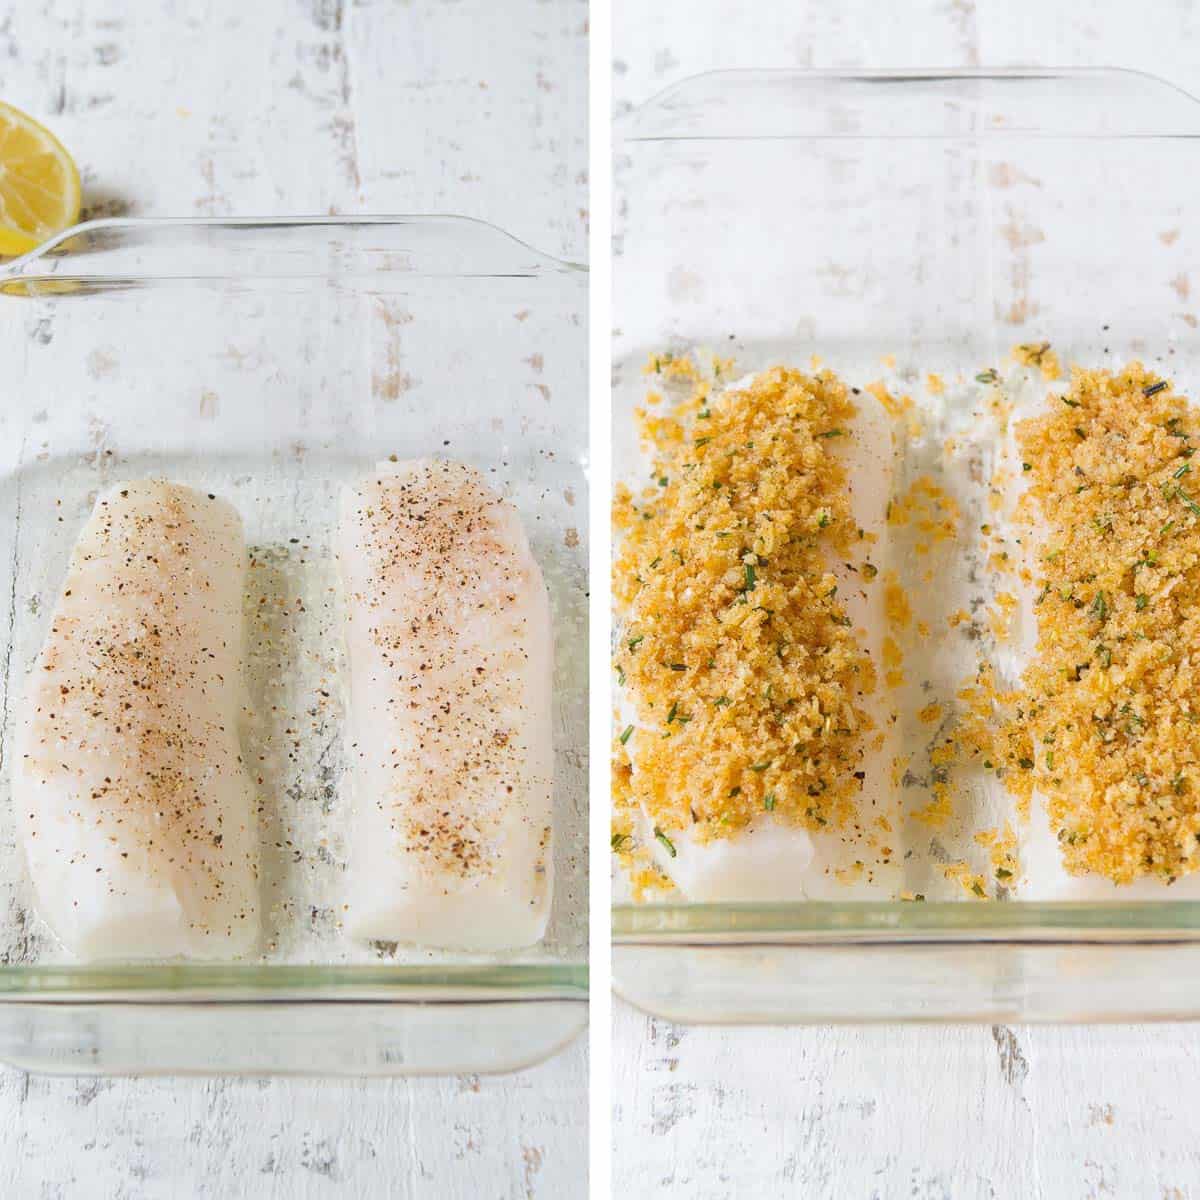 Cod fillets in glass baking dish, topped with panko bread crumbs.